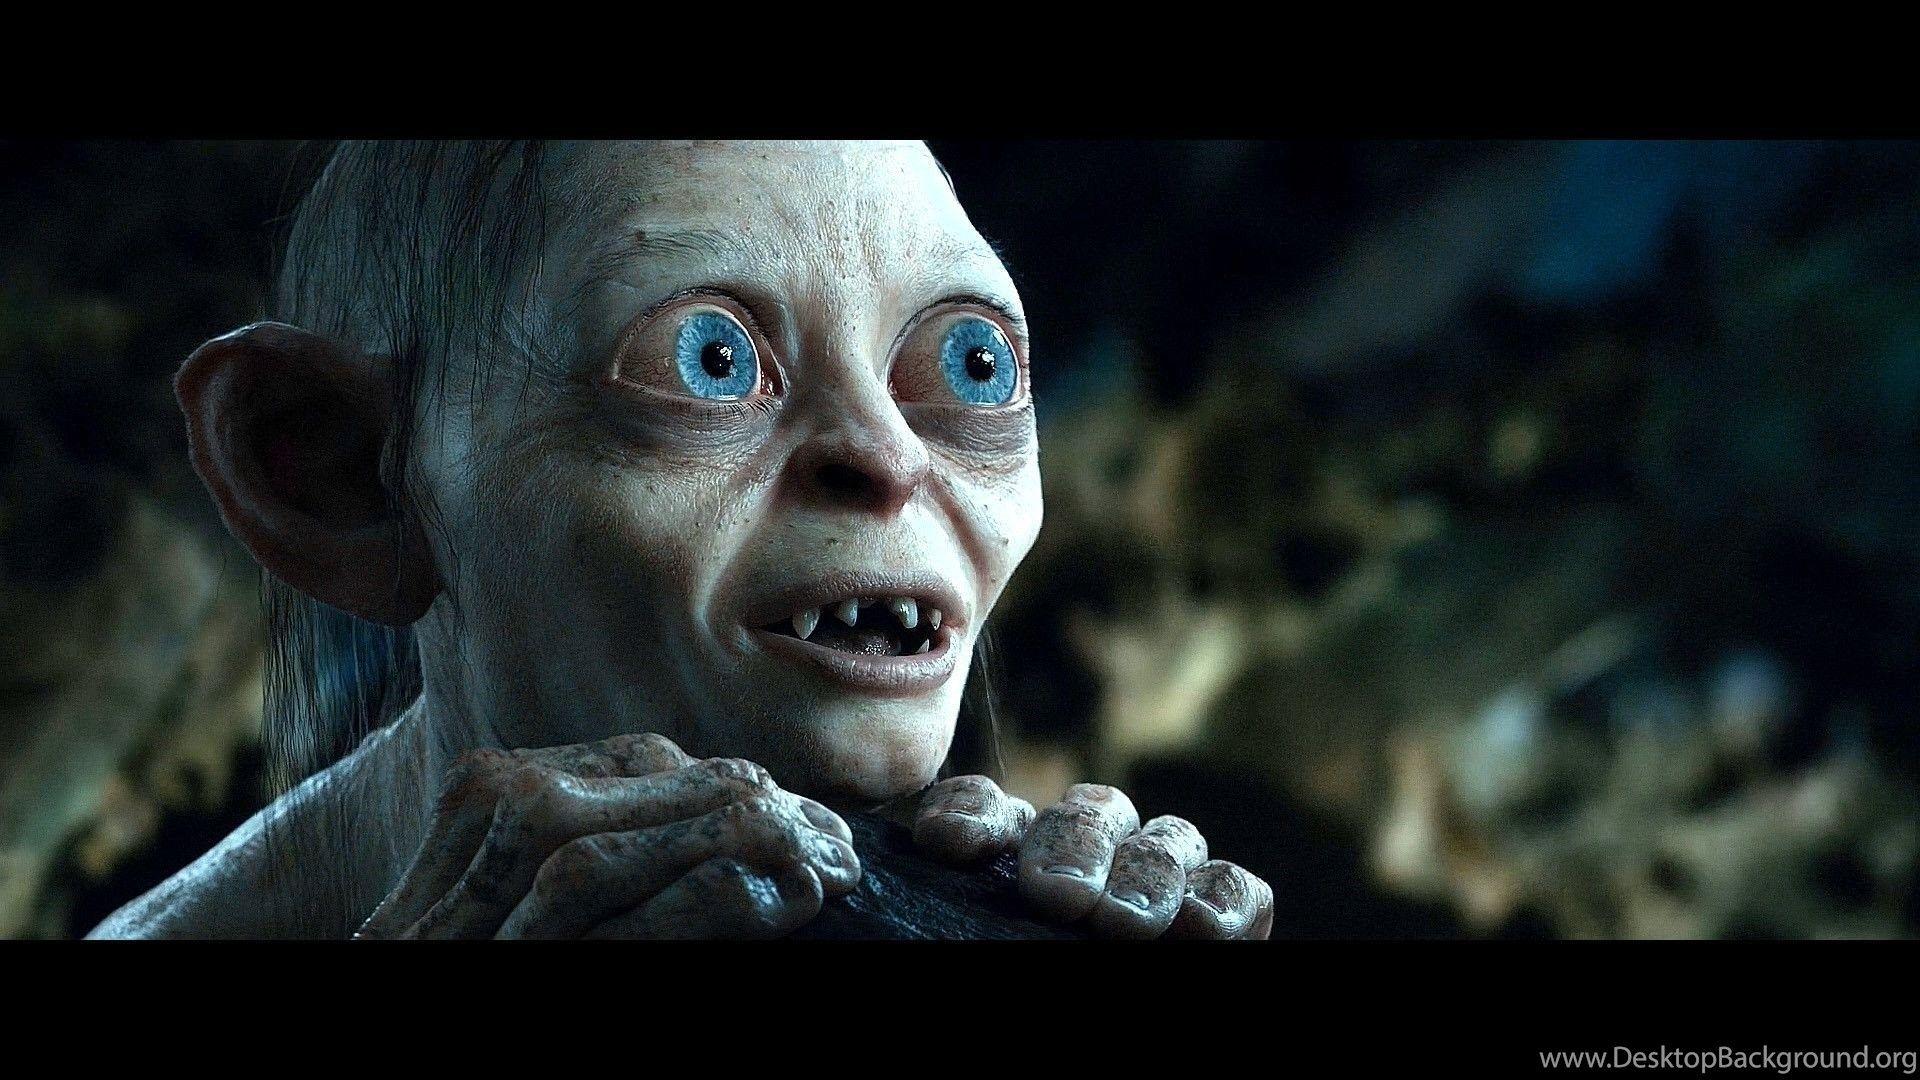 is gollum in the hobbit or lord of the rings